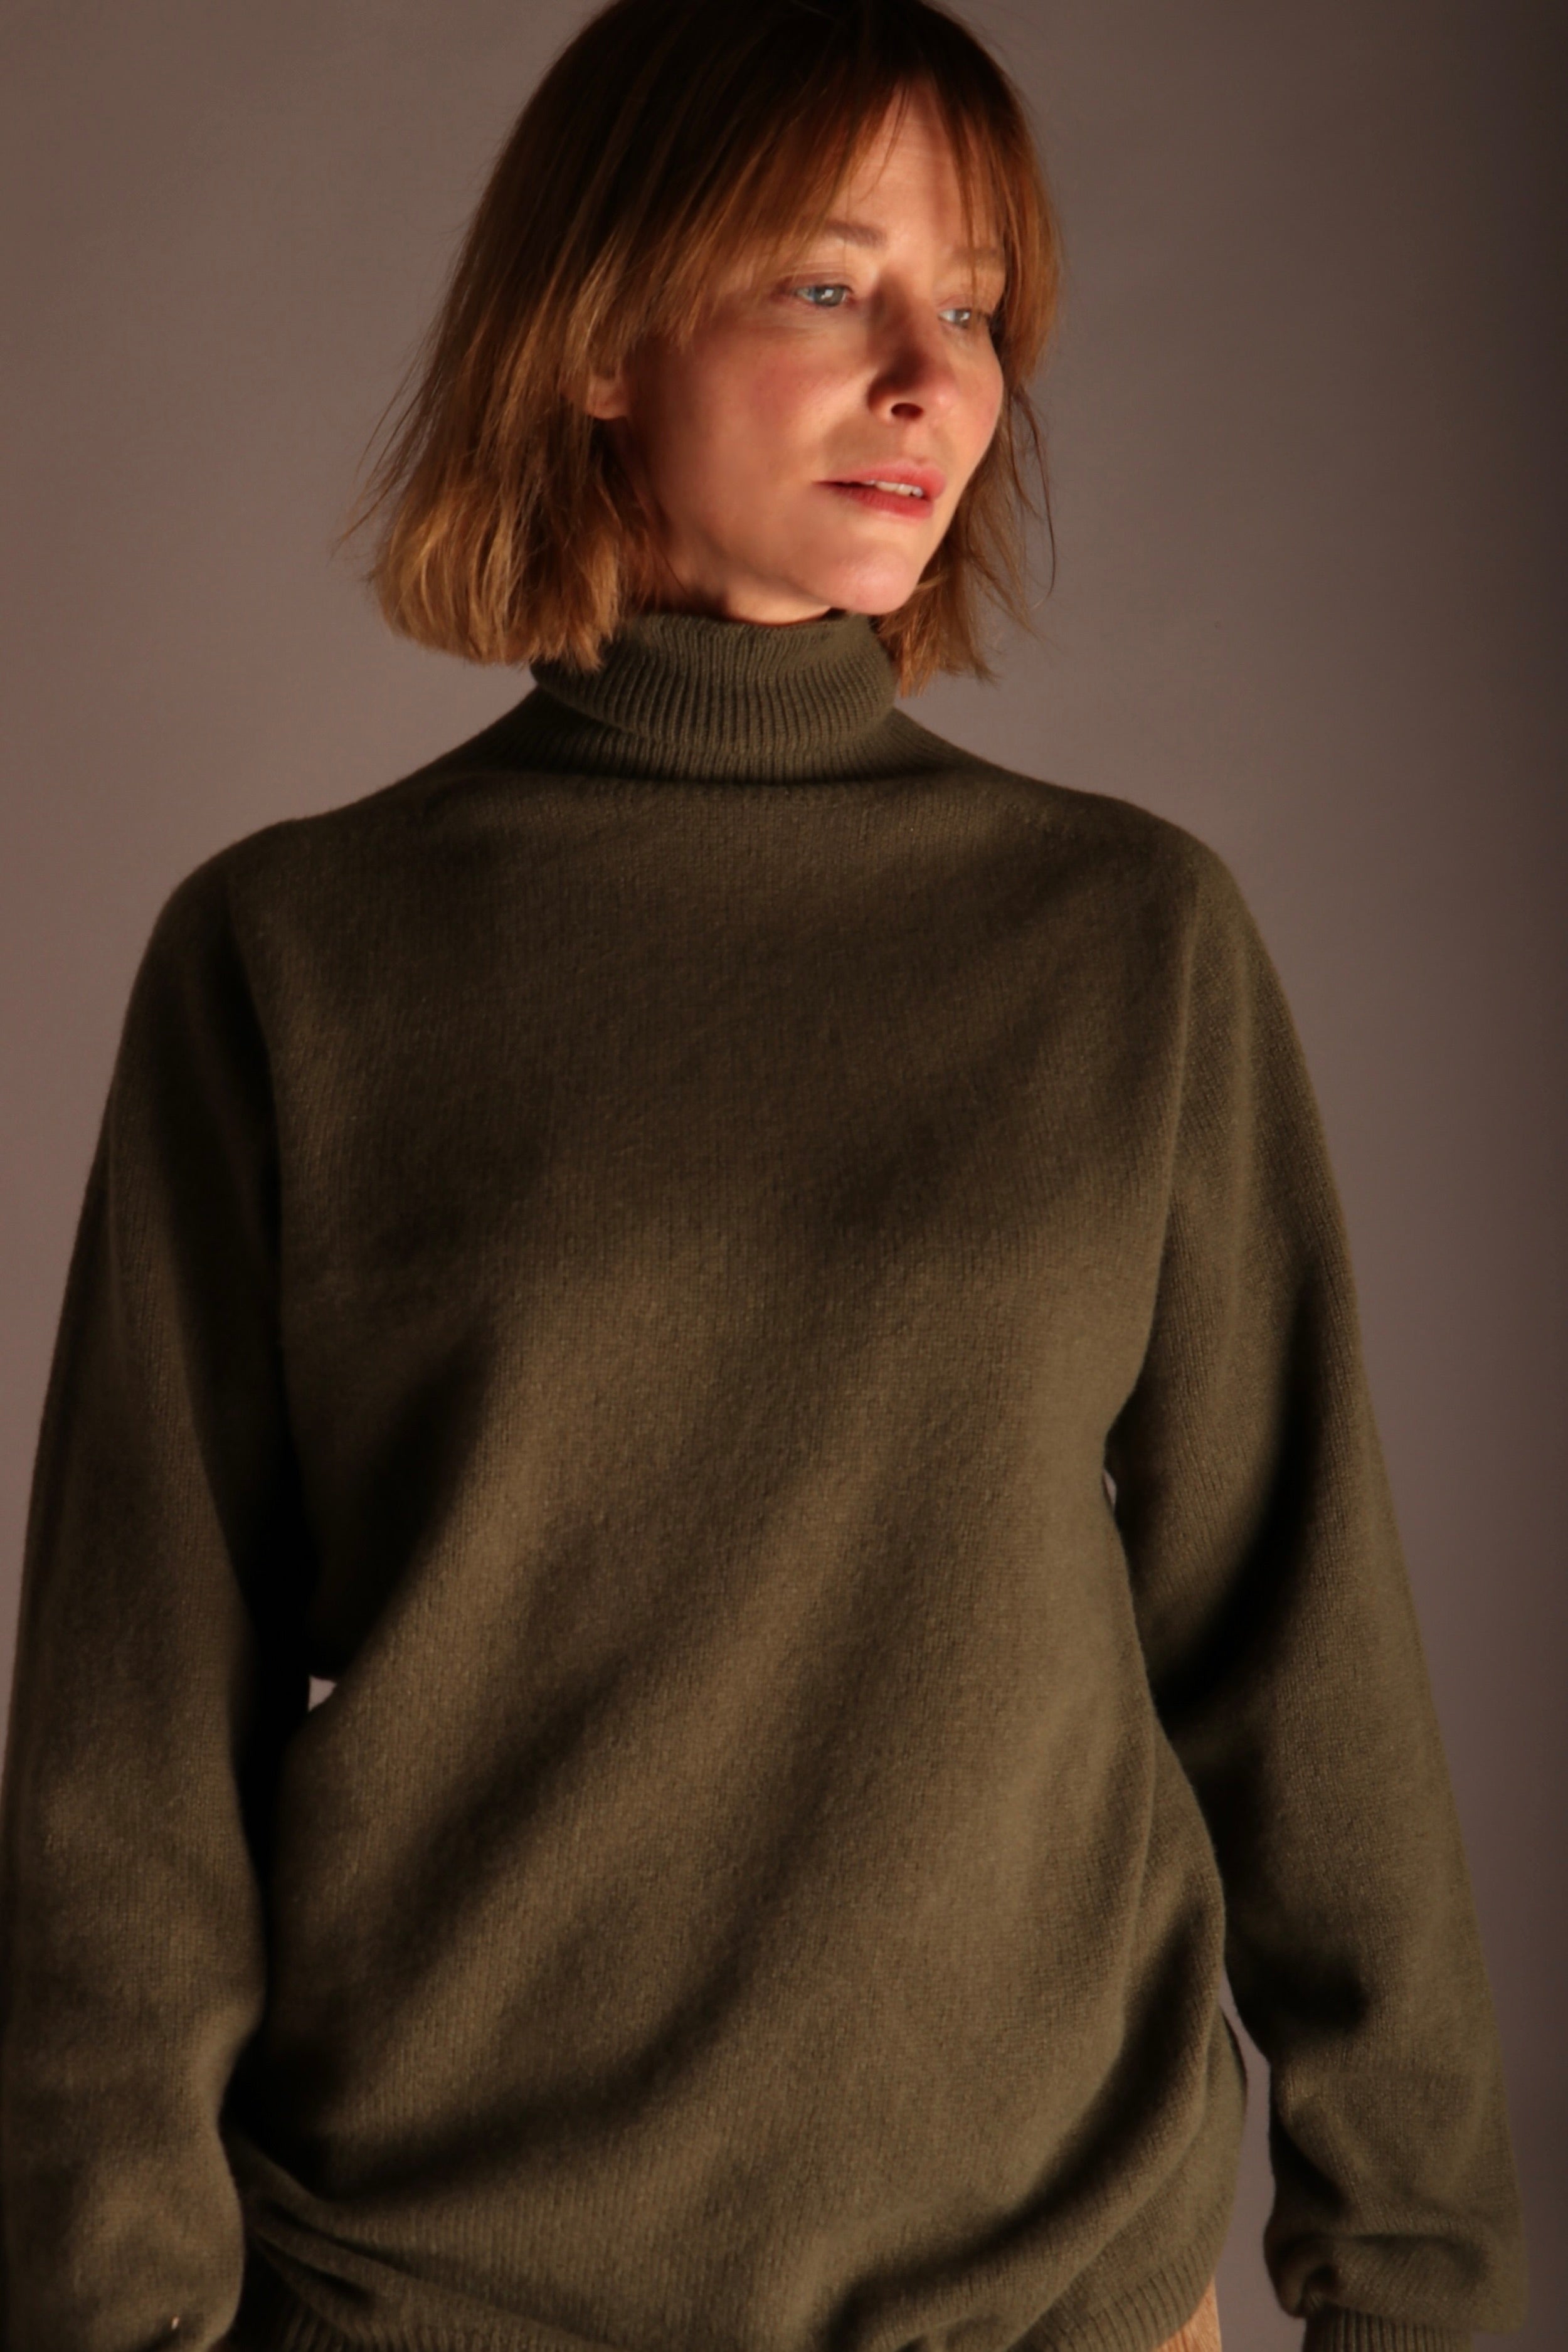 Sienna wears Carrier Company Merino & Cashmere Supersoft Roll Neck Jumper and Dutch Trousers in Corduroy